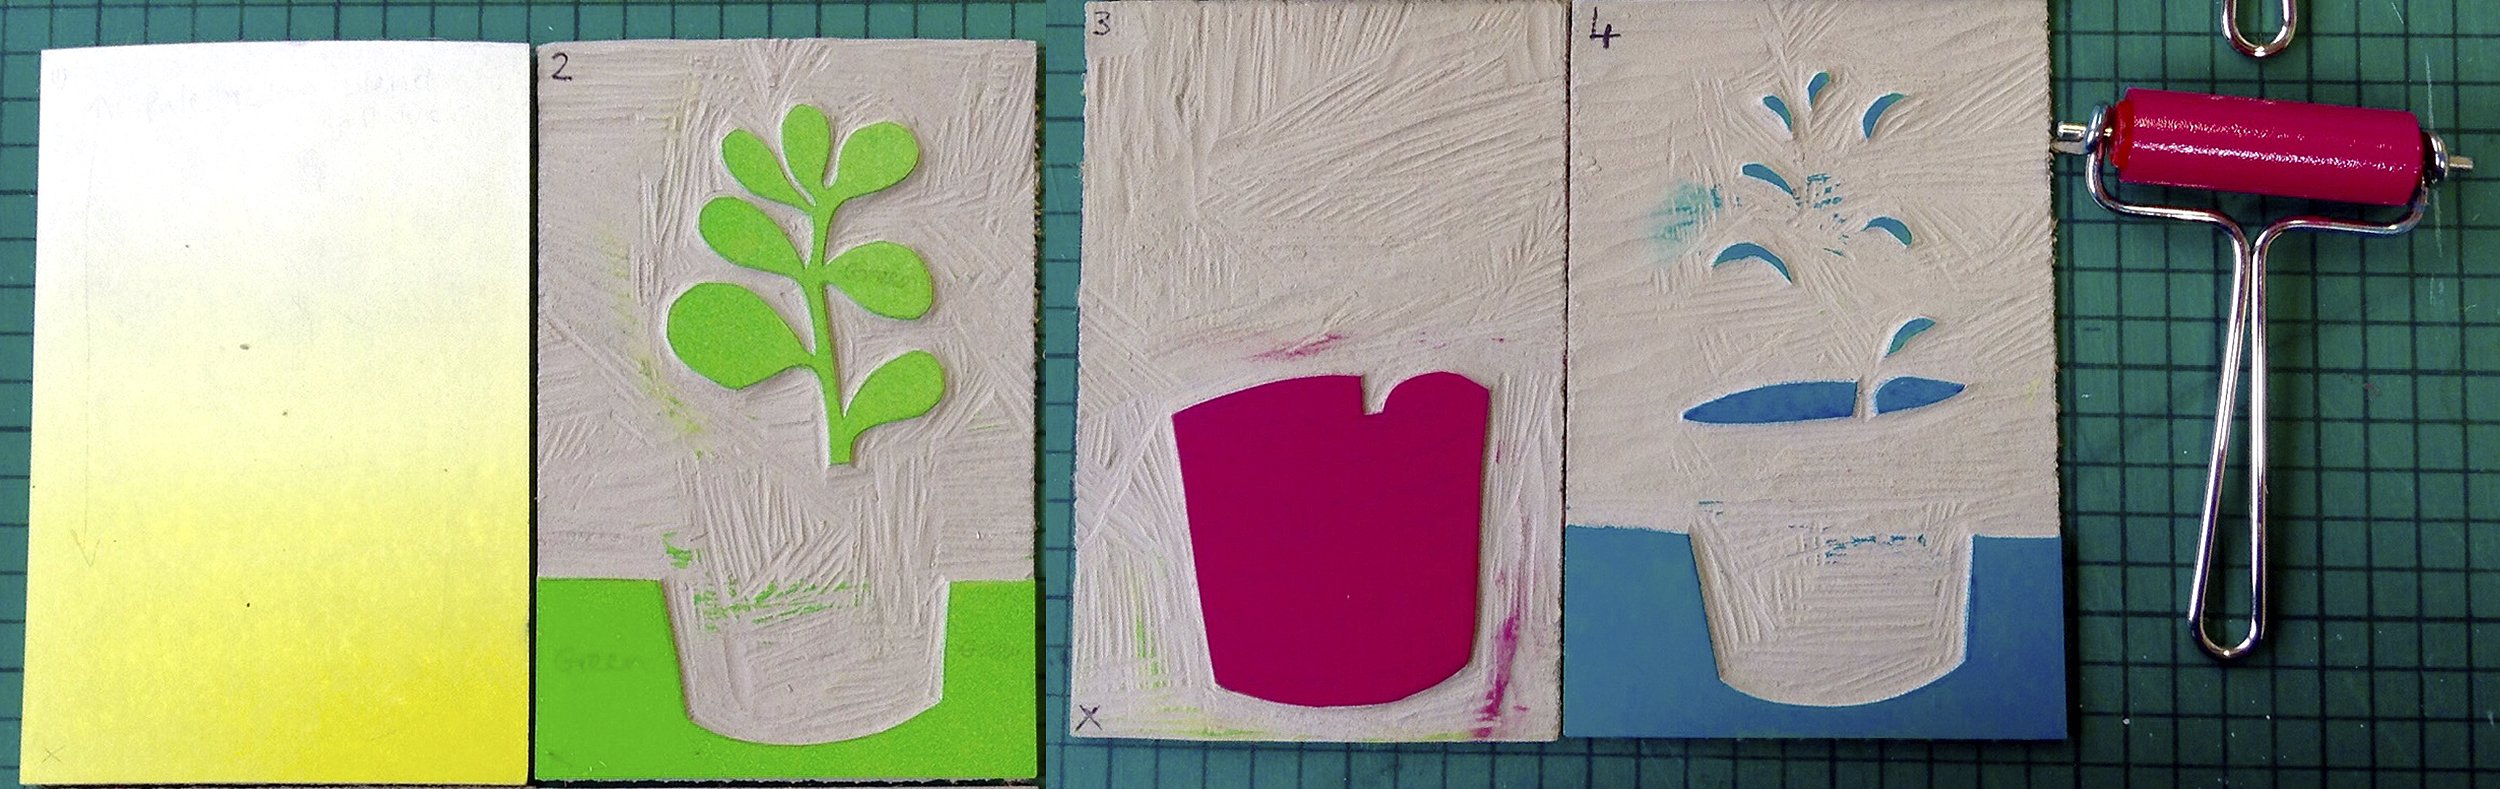 4 Unexpected Ways to Use the Same Linoleum Block - The Art of Education  University